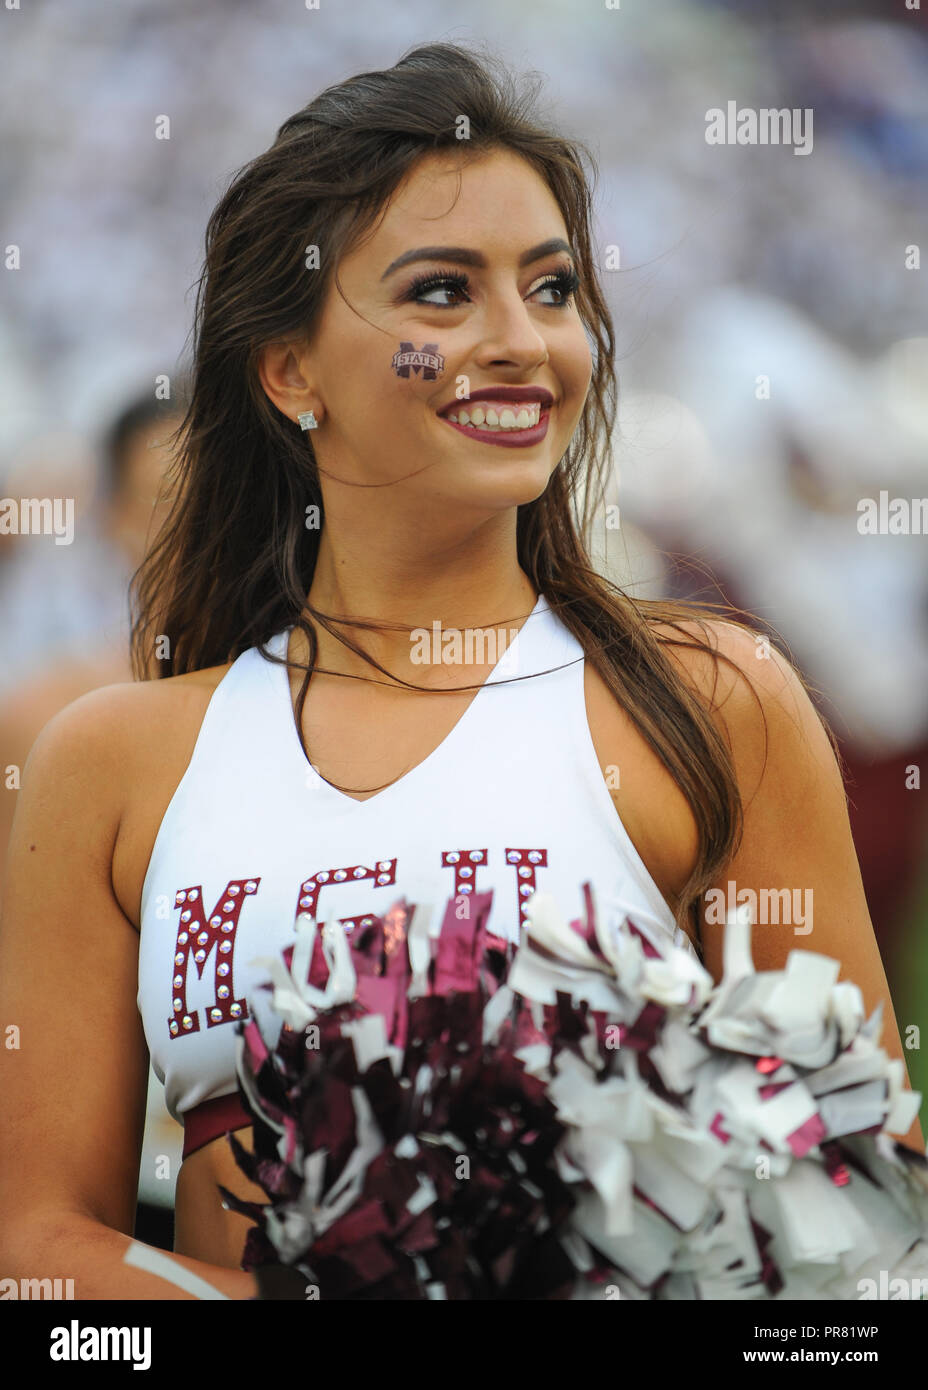 Starkville, MS, USA. 29th Sep, 2018. An MSU cheerleader during NCAA football action at Davis Wade Stadium in Starkville, MS. Florida defeated Mississippi State, 13-6. Kevin Langley/CSM/Alamy Live News Stock Photo